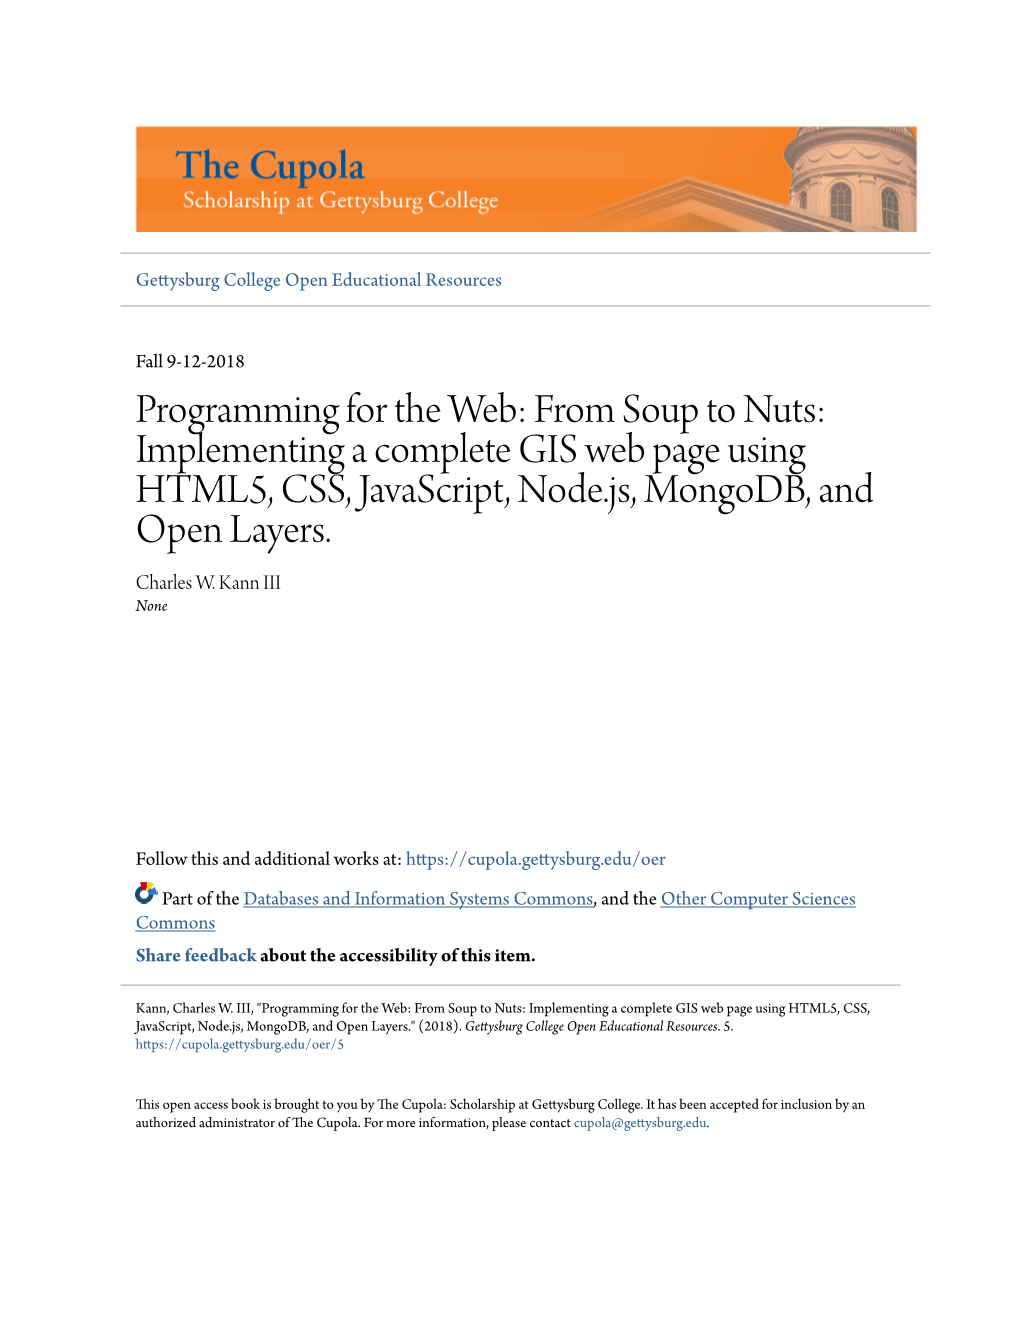 Programming for the Web: from Soup to Nuts: Implementing a Complete GIS Web Page Using HTML5, CSS, Javascript, Node.Js, Mongodb, and Open Layers